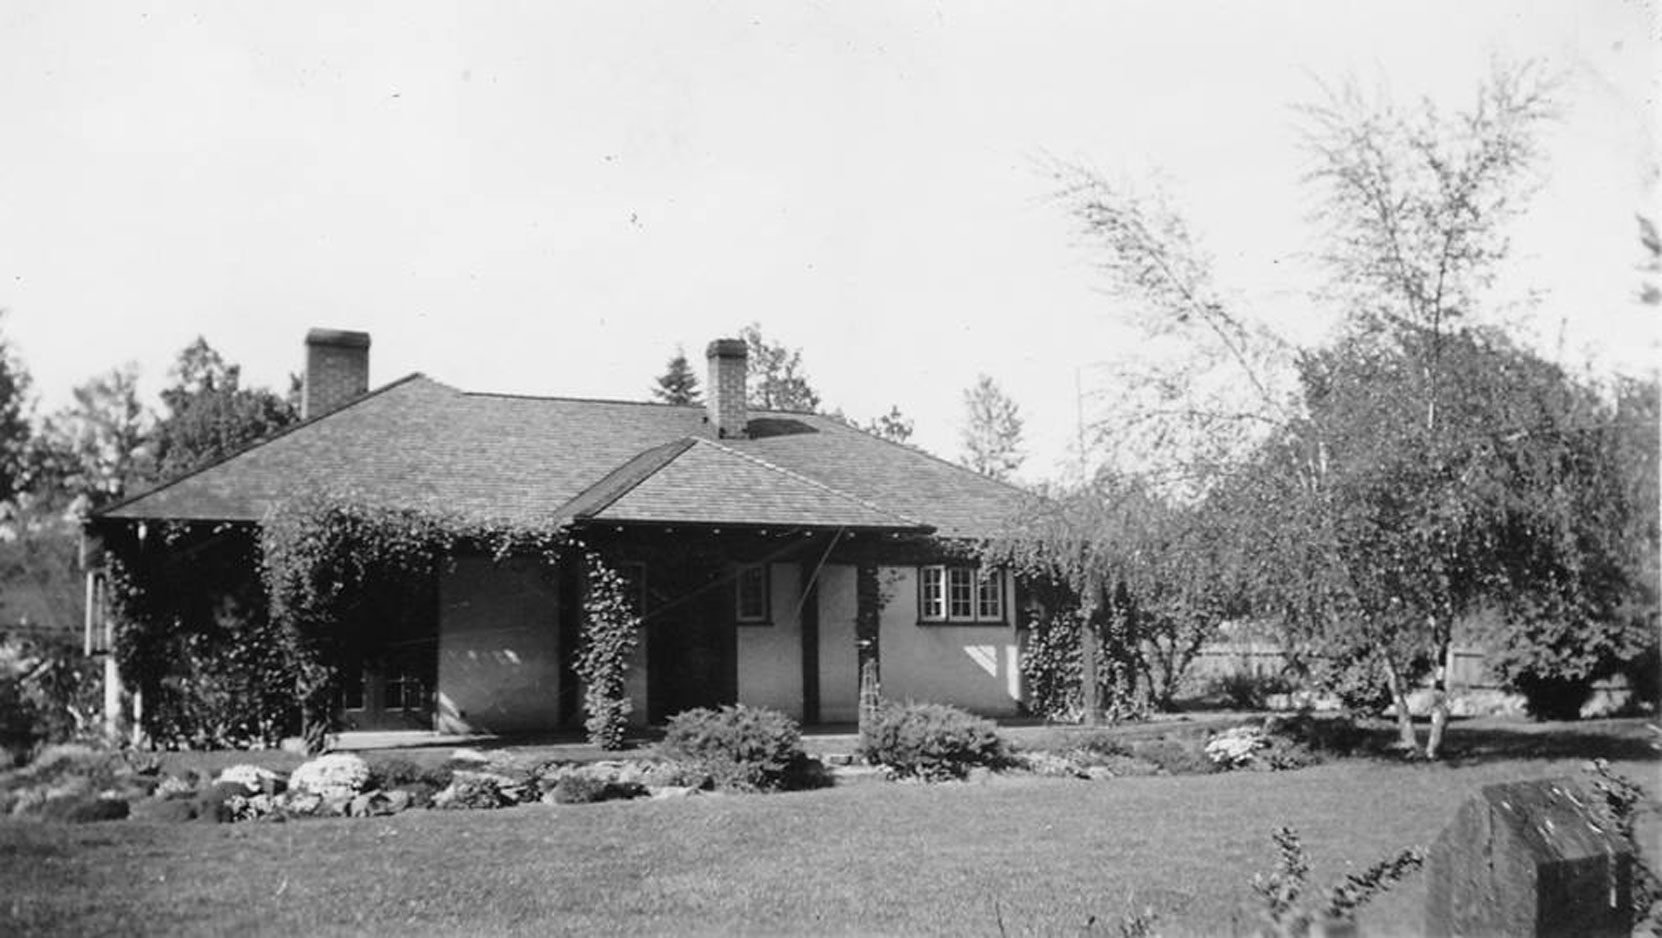 Claude Green's house at 733 Wharncliffe Road, Duncan circa 1940. (courtesy of Claude Green's daughter Sylvia Dyer - private collection. Used with permission)